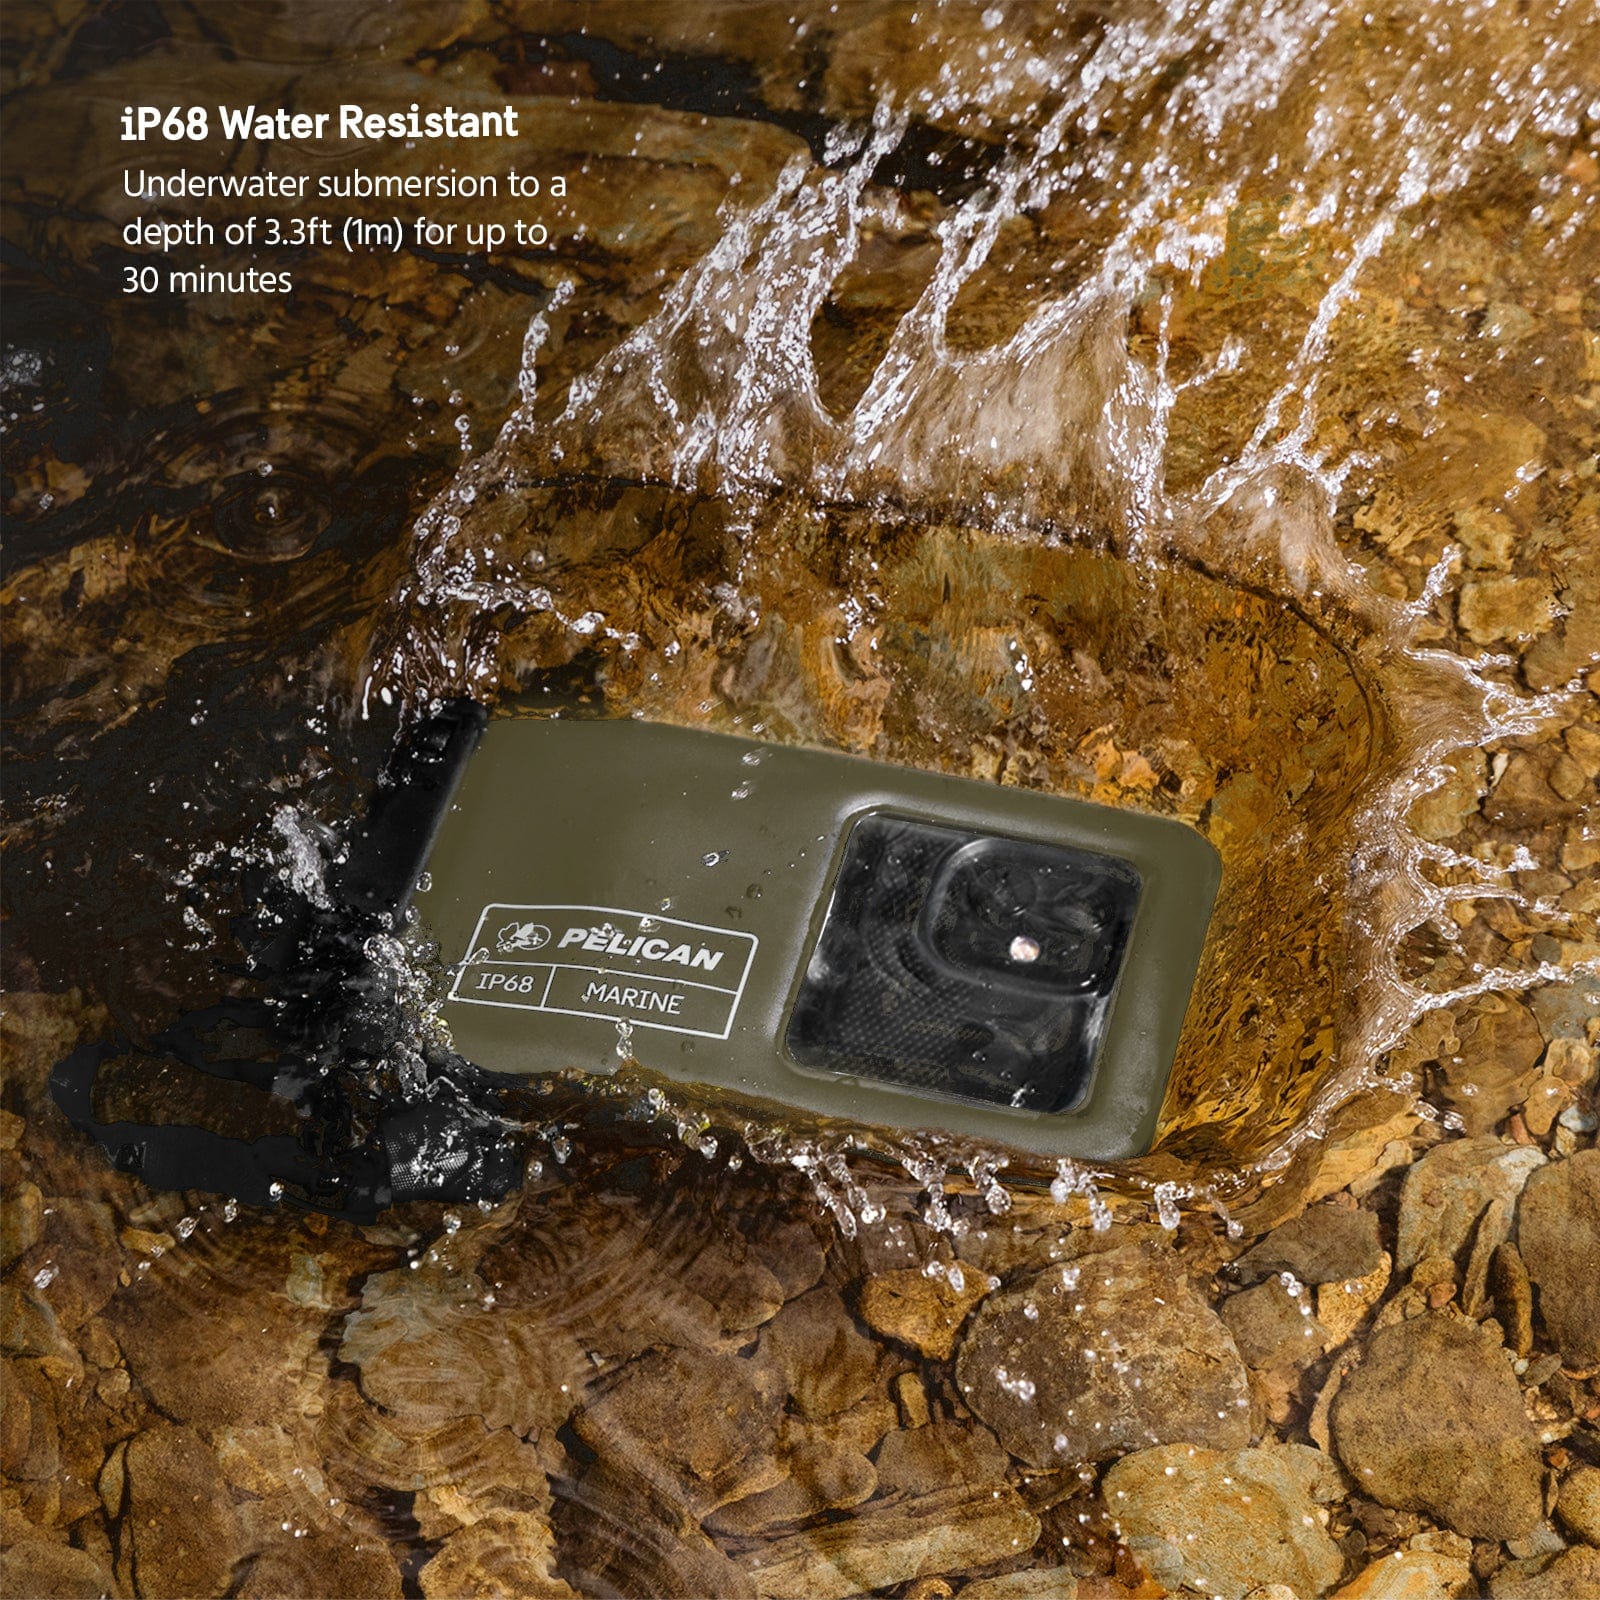 ip68 Water Resistant. Underwater submersion to a depth of 3.3ft (1m) for up to 30 minutes.